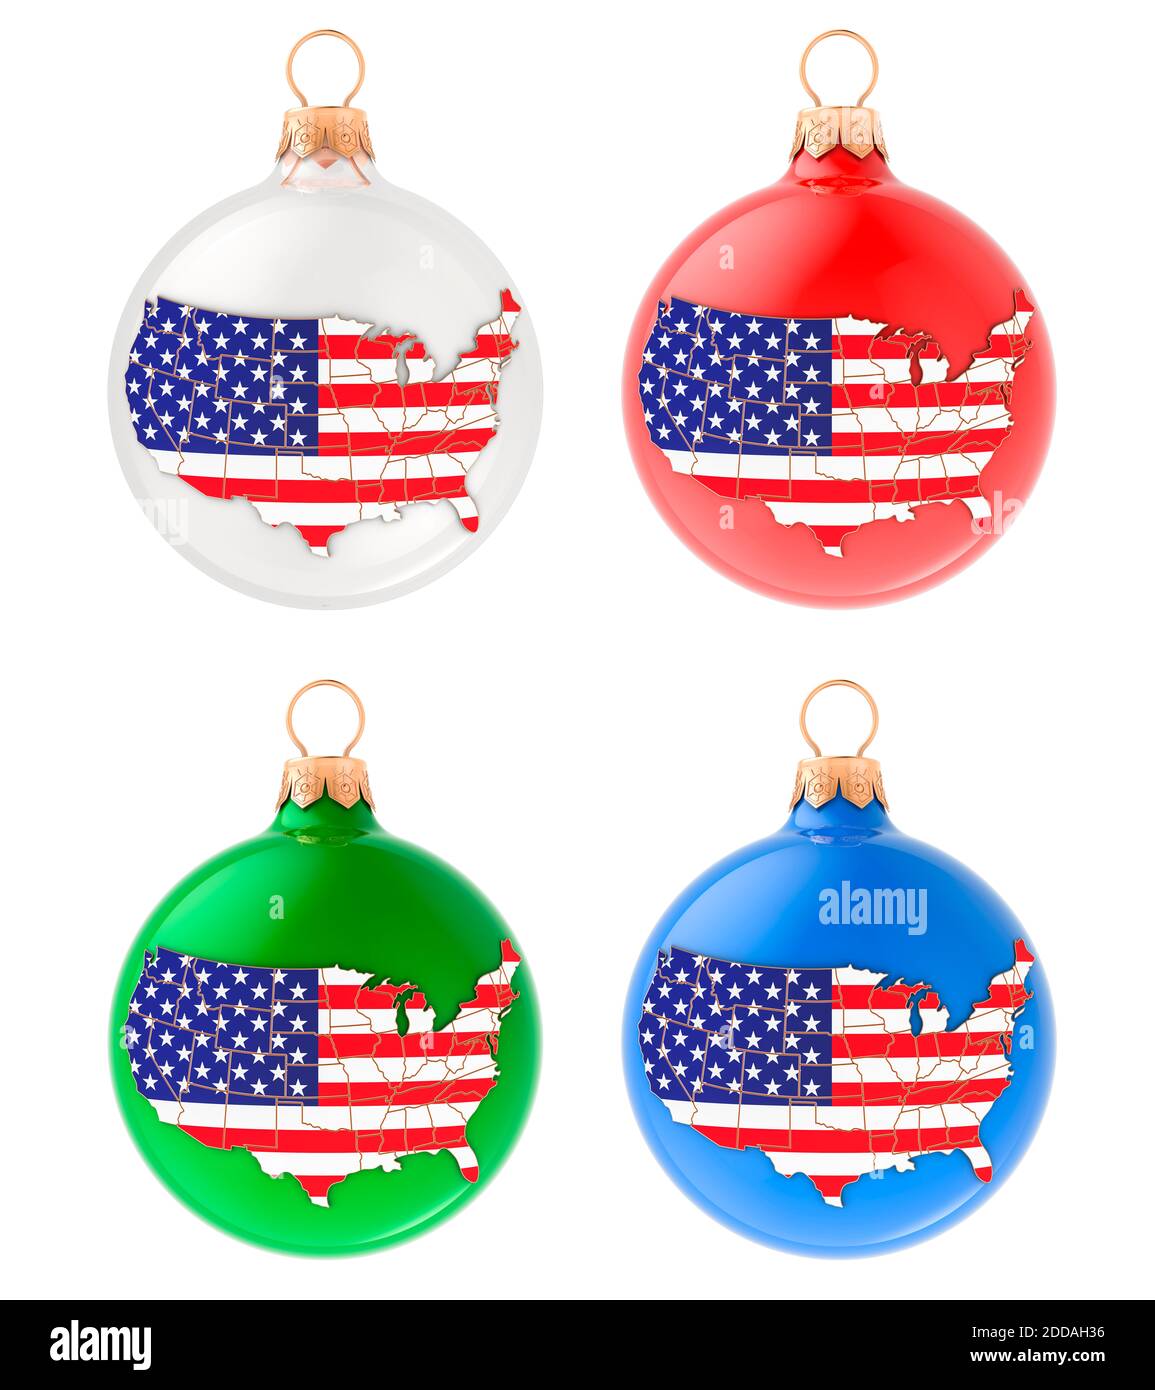 Christmas balls with the United States map, 3D rendering isolated on white background Stock Photo